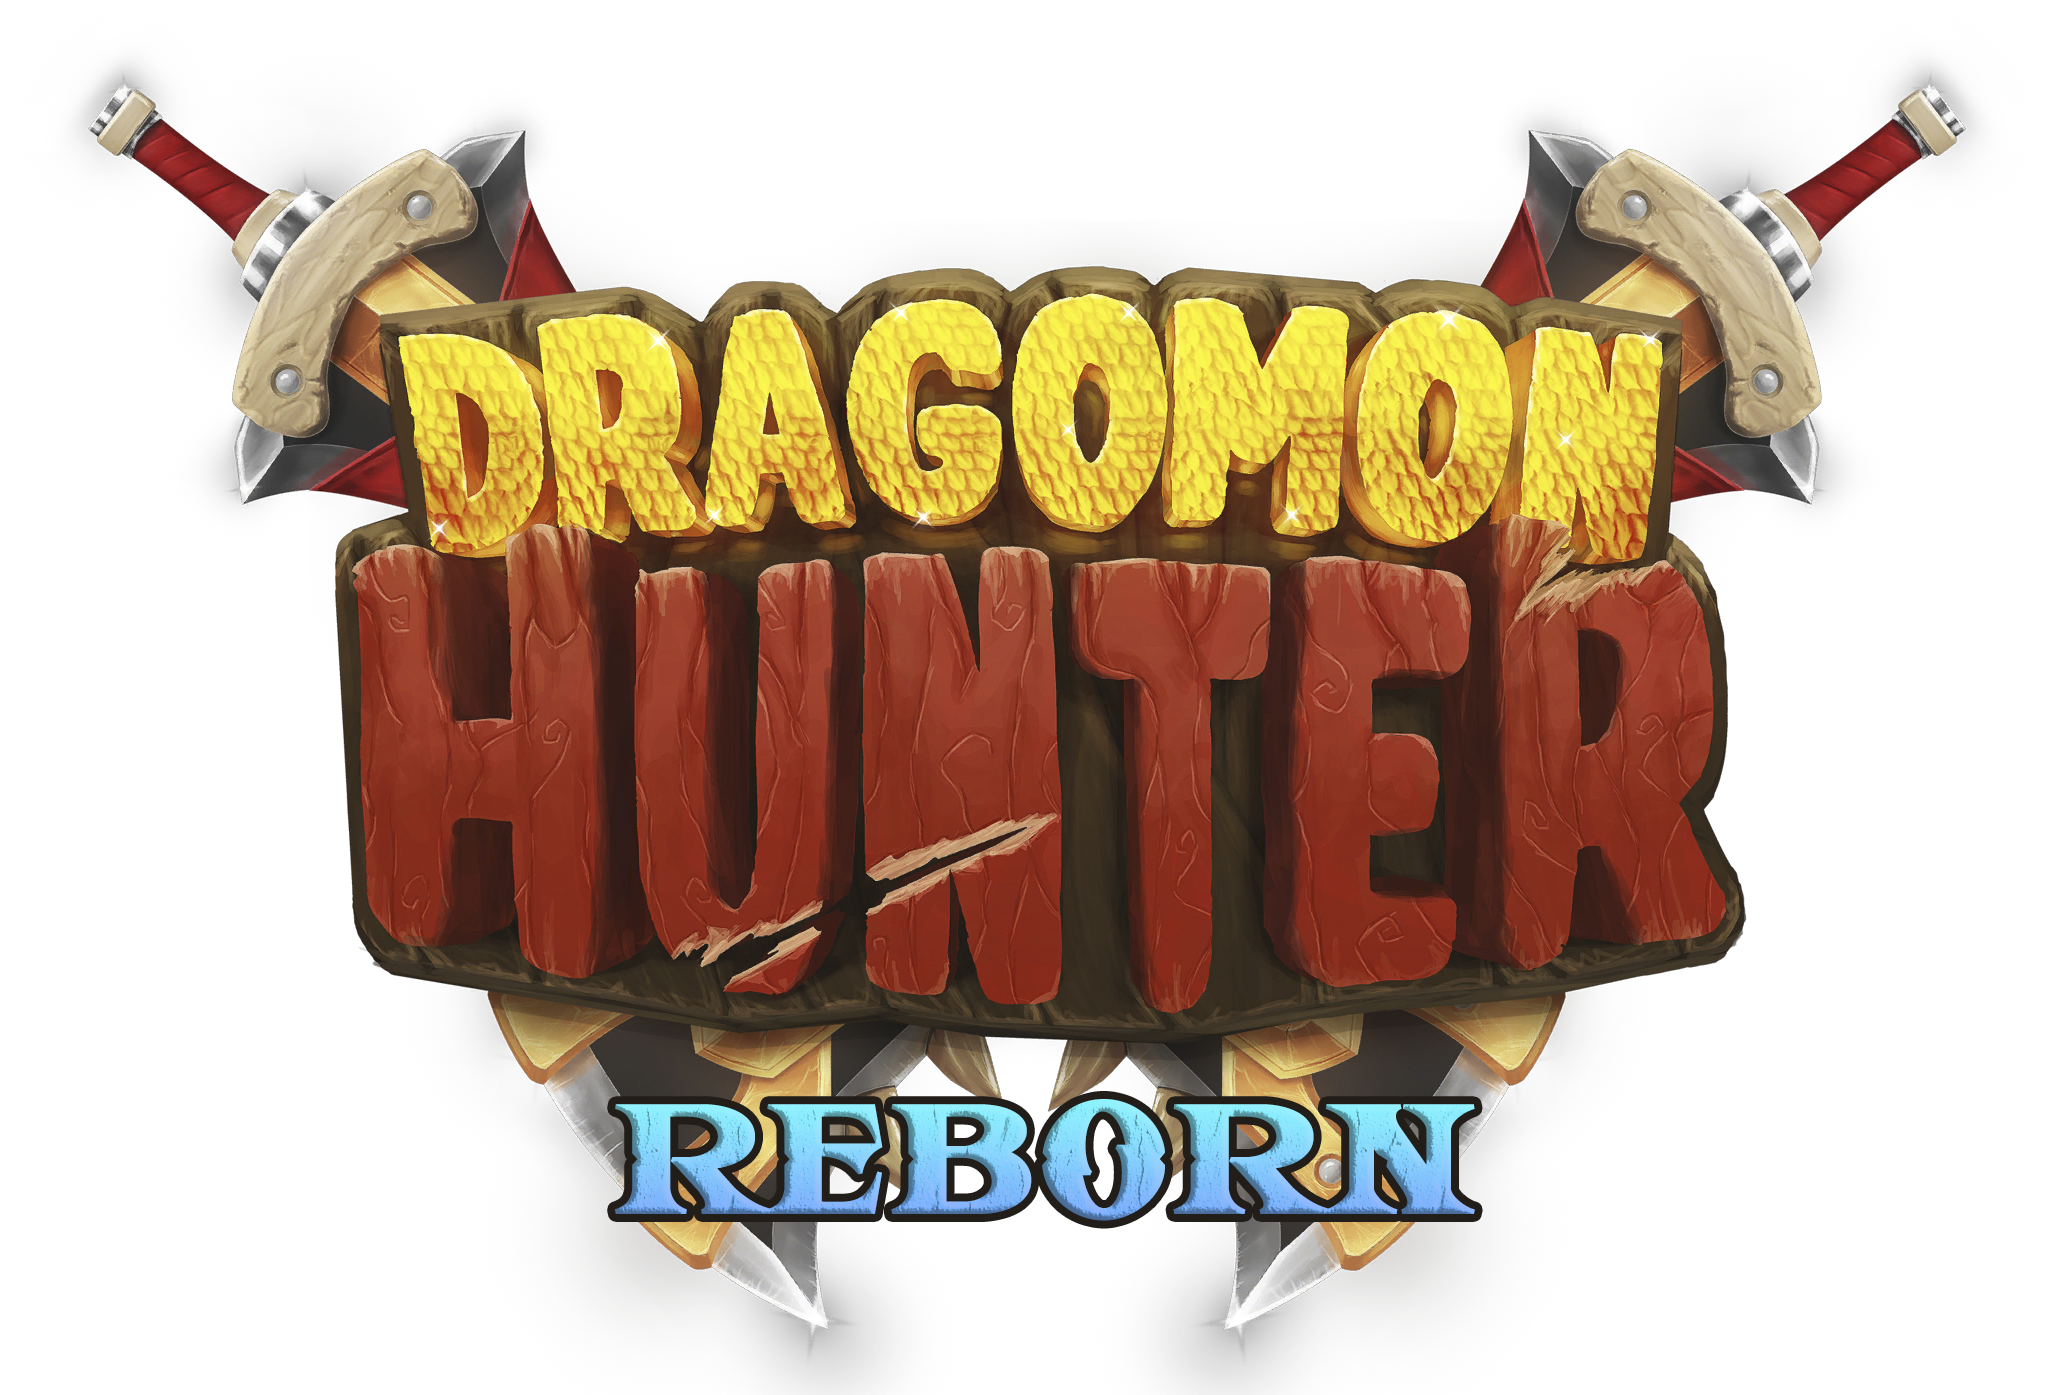 tM2SQ9R - [Reborn] Dragomon Hunter - CAP Lv95 ON! - Rates +300% - All Companions Free with LP, Unlimited Fortune Gems with LP - RaGEZONE Forums